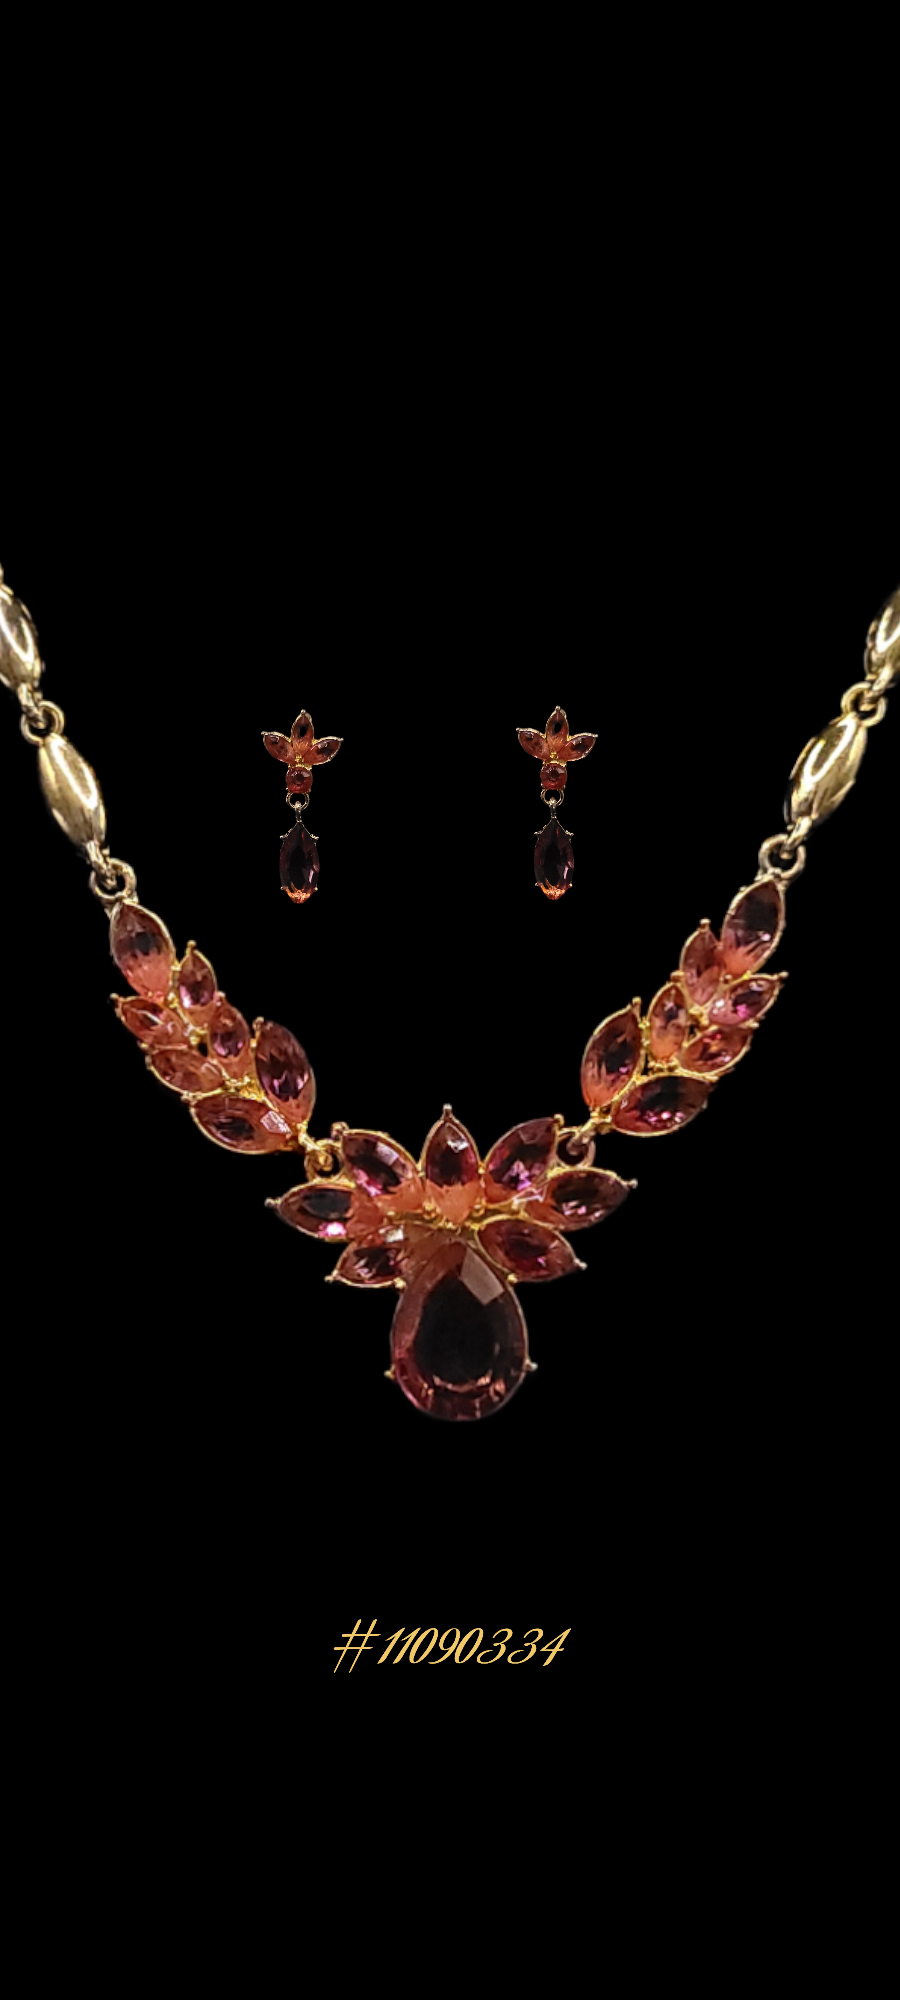 LOVELY PINK DIAMOND AND GOLD PARTY THEME NECKLACE WITH EARRINGS